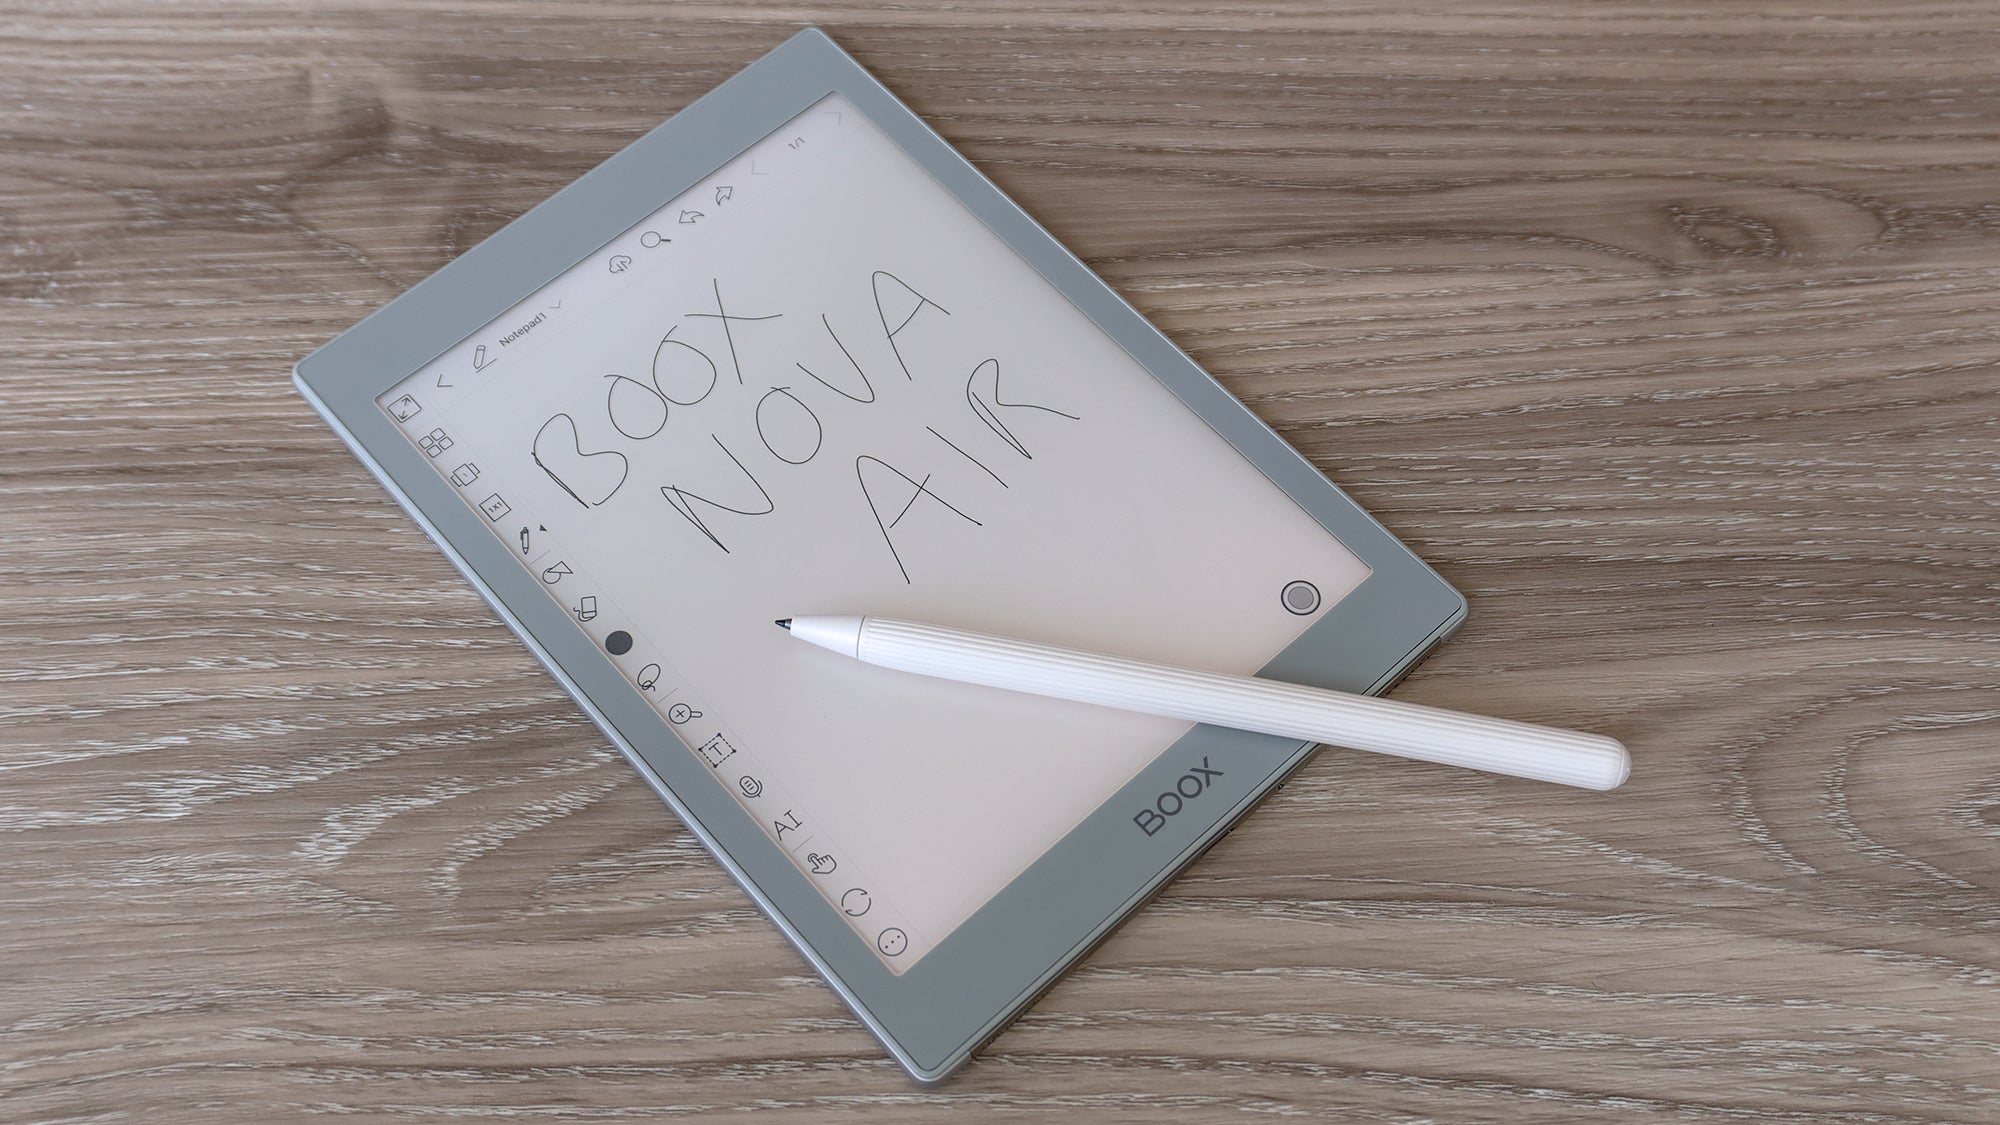 The writing experience on the Nova Air is almost as good as the reMarkable tablets offer, and a textured screen protector provides an authentic pen on paper feel as you write. (Photo: Andrew Liszewski - Gizmodo)